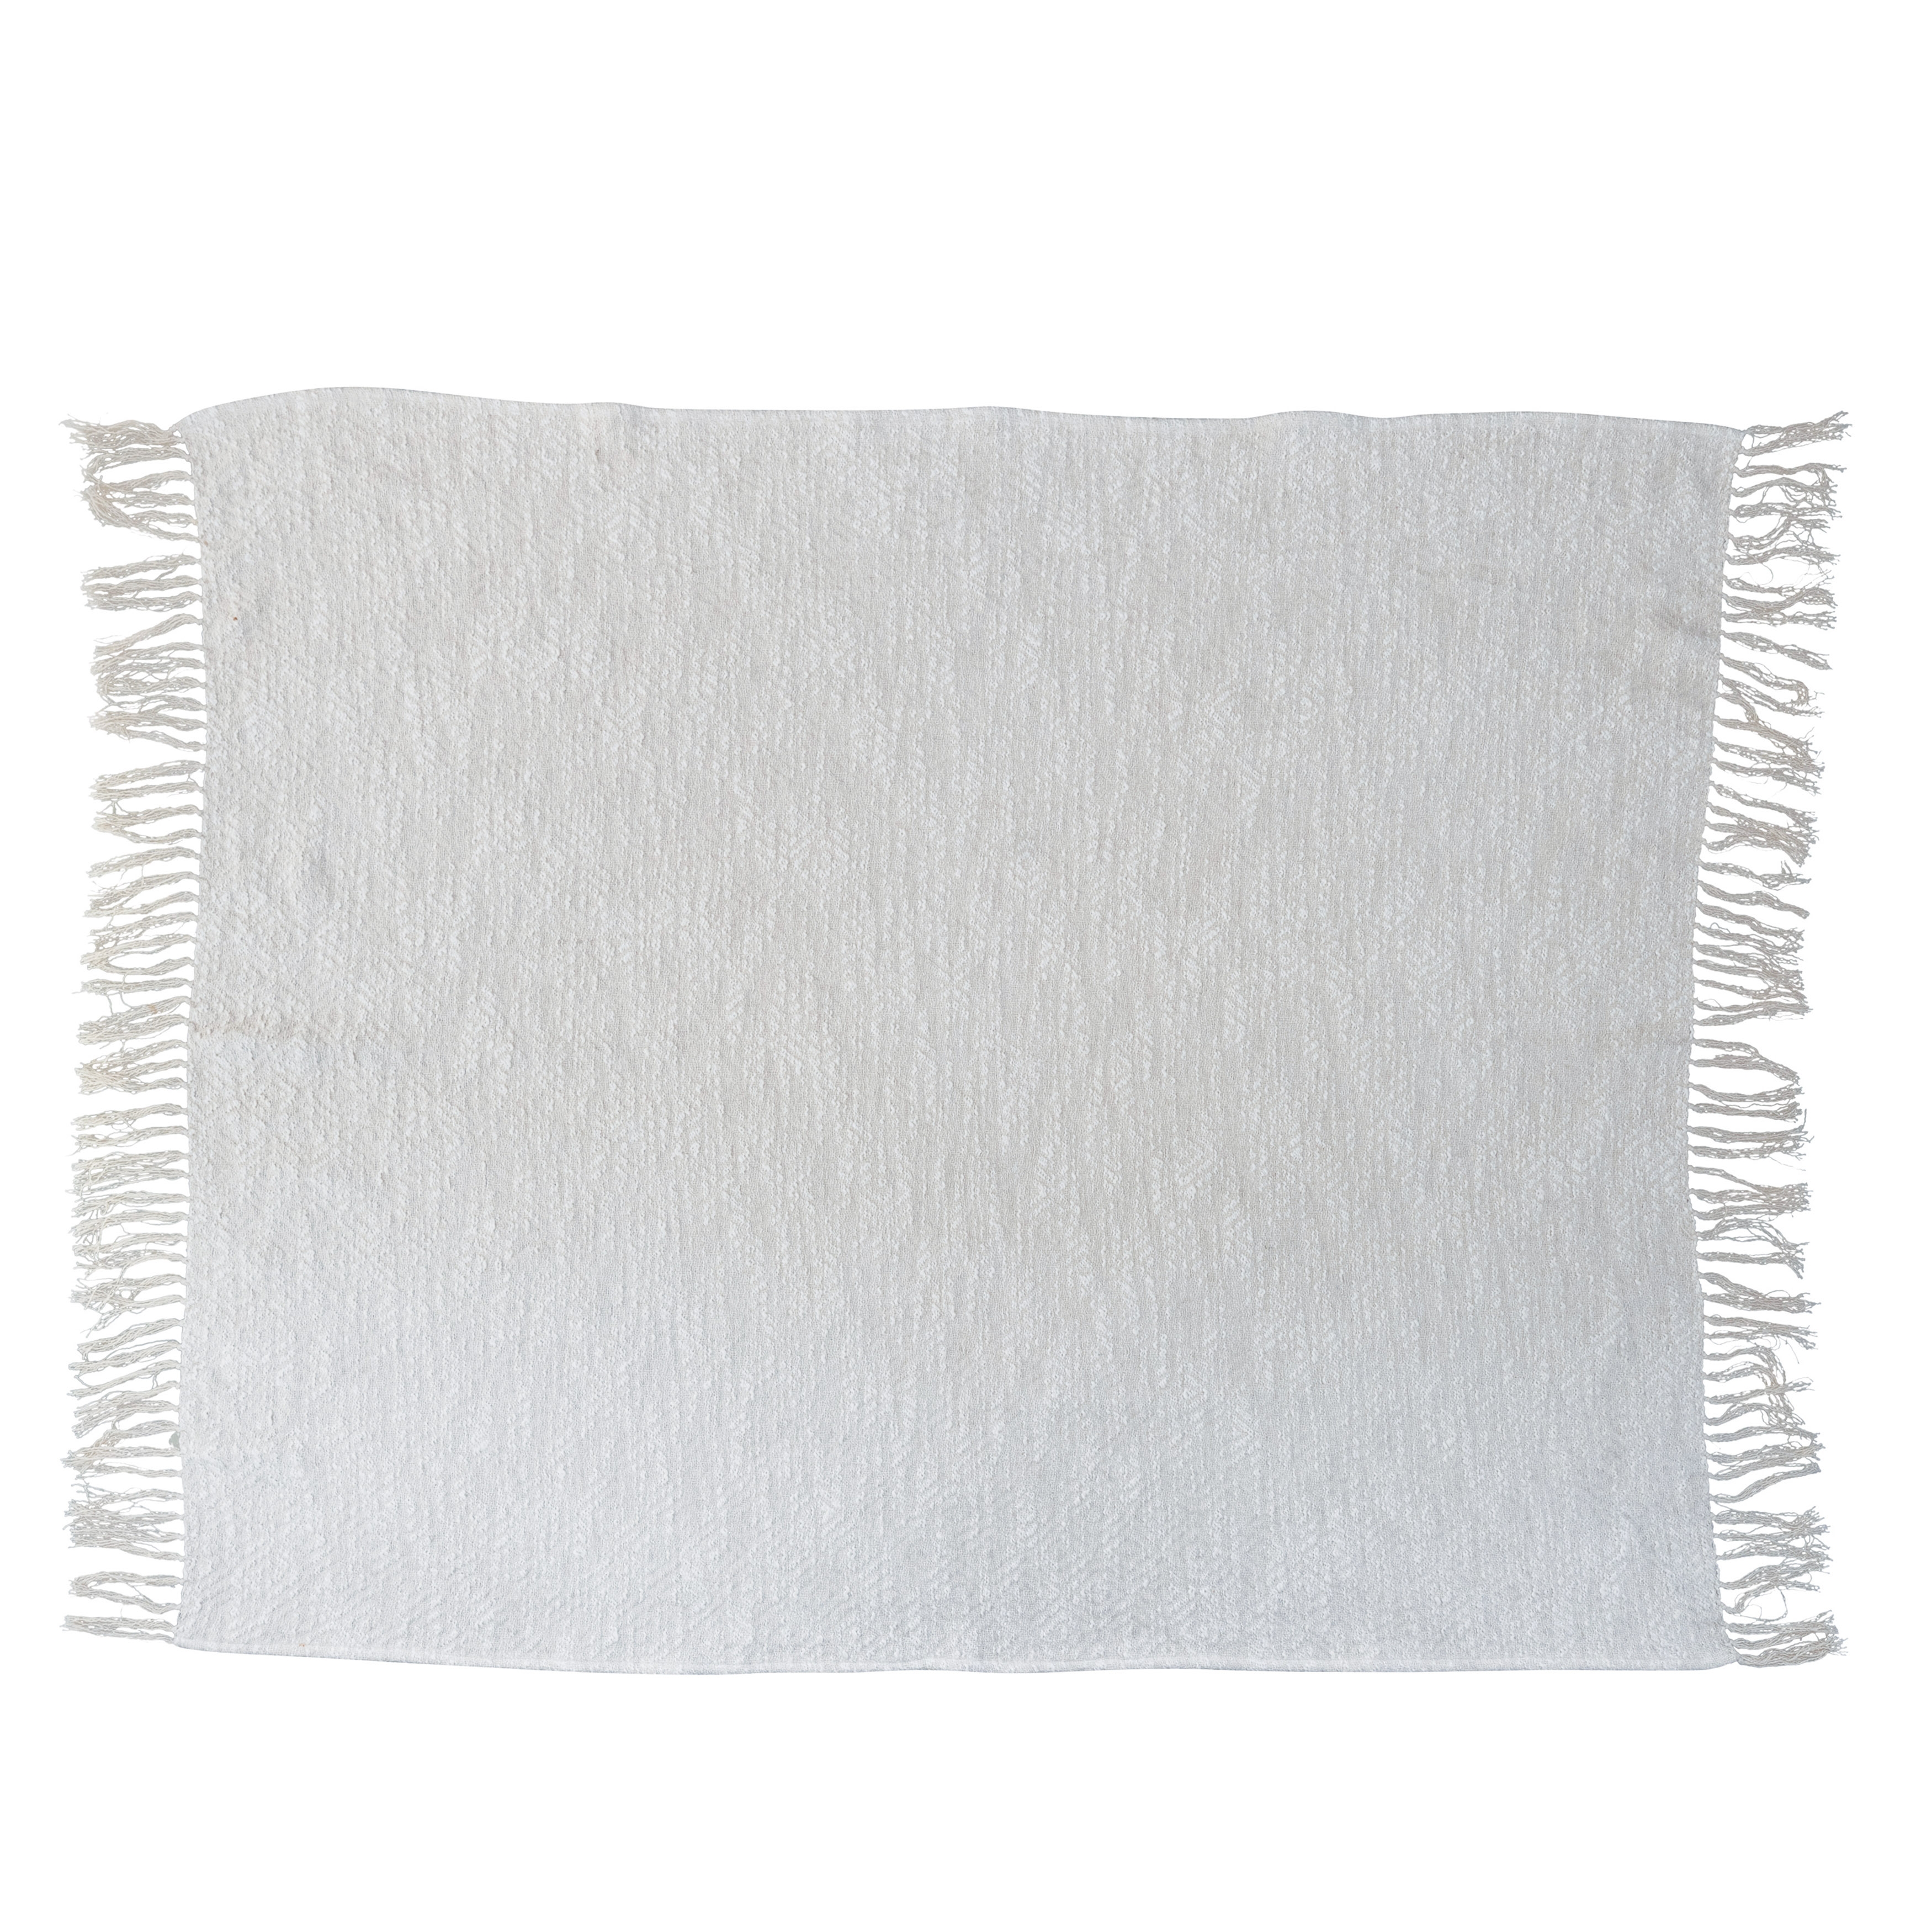  Cotton Throw Blanket with Silver Metallic Thread and Fringe, Cream - Image 0